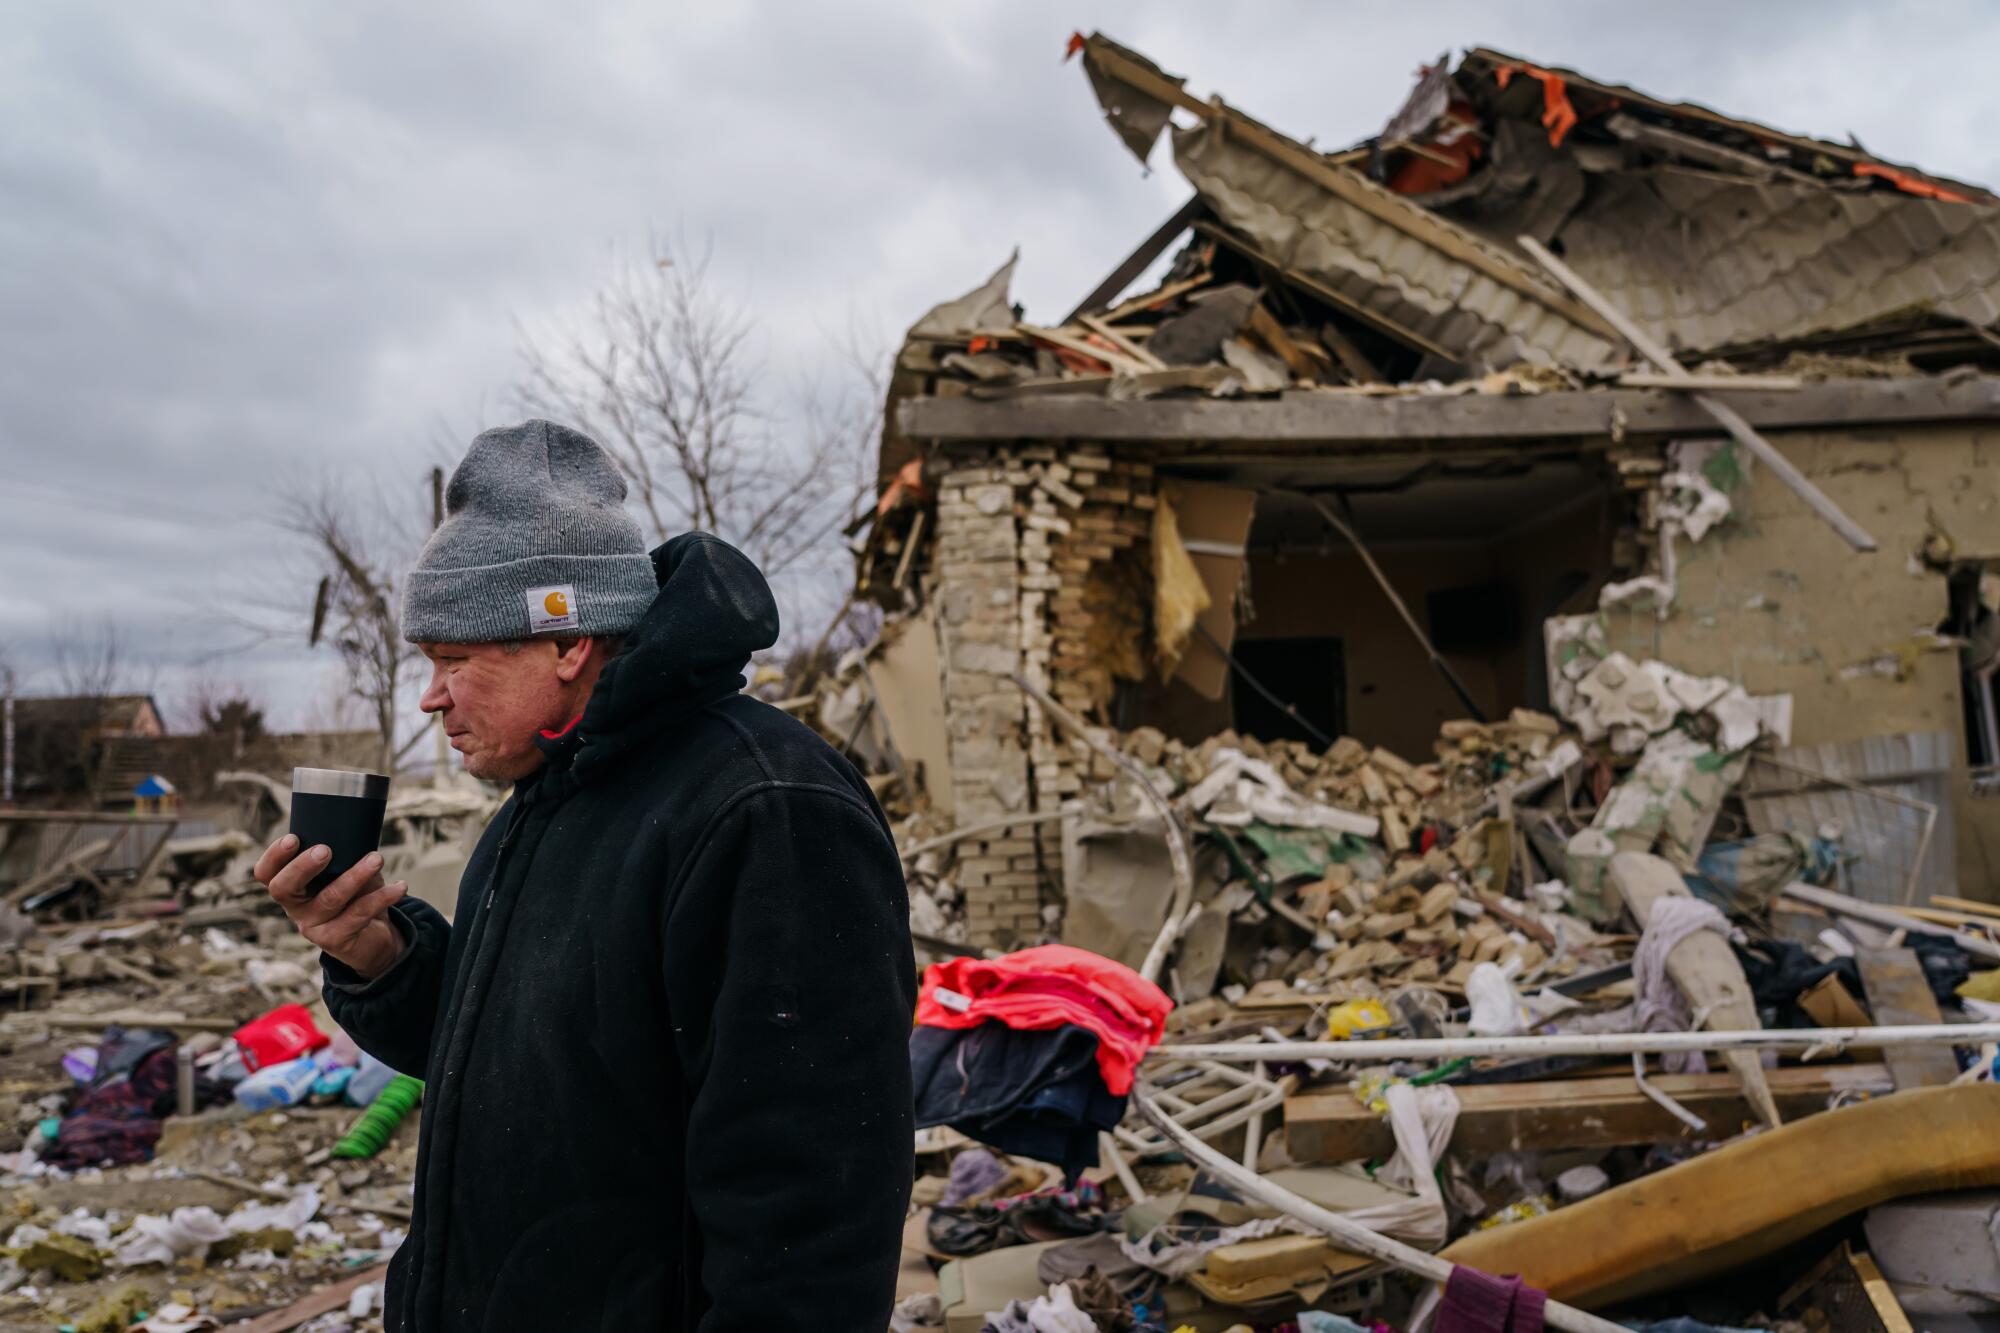 Igor Majayev looks over the remains of his home after an attack that killed his wife and daughter in Markhalivka, Ukraine.